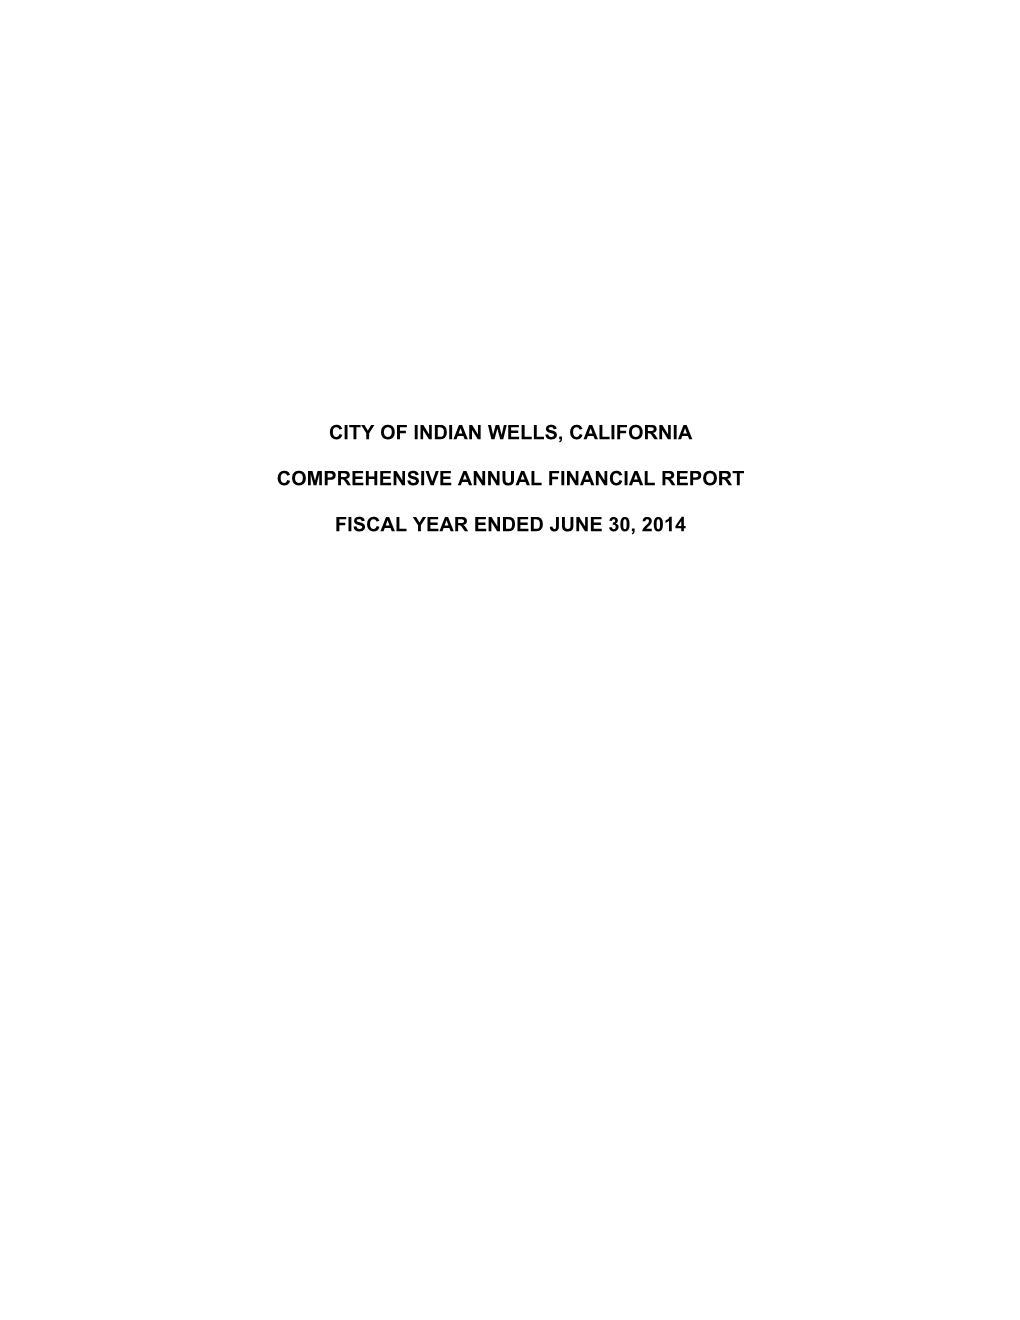 City of Indian Wells, California Comprehensive Annual Financial Report Fiscal Year Ended June 30, 2014